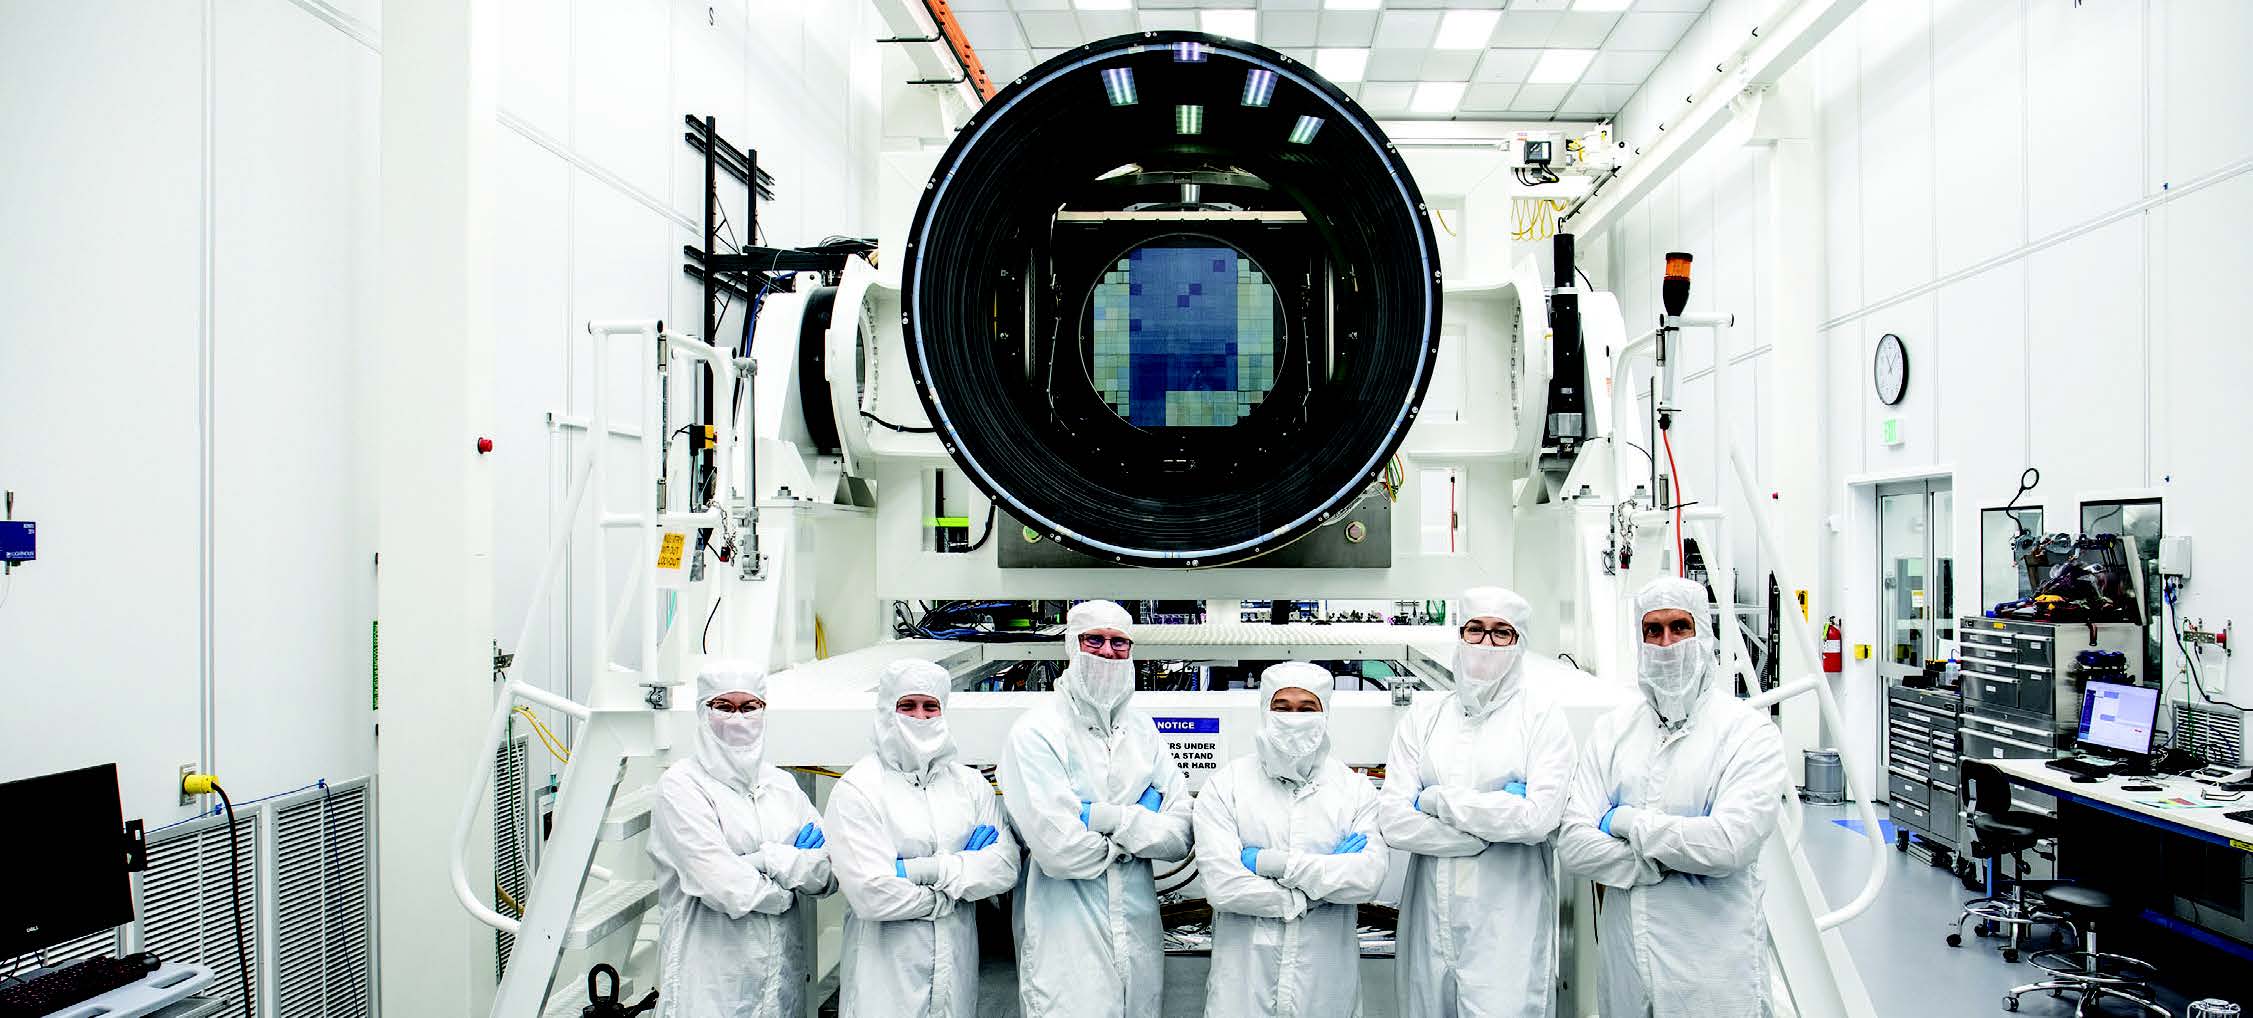 Researchers at SLAC National Accelerator Laboratory are nearly done with the LSST Camera, the world's largest digital camera ever built for astronomy. Roughly the size of a small car and weighing in at three tons, the camera features a five-foot-wide front lens and a 3,200 megapixel sensor that will be cooled to -100°C to reduce noise. Once installed atop the Vera C. Rubin Observatory's Simonyi Survey Telescope in Chile, the camera will survey the southern night sky for a decade, generating a wealth of data for scientists to analyze. This data will help unravel some of the universe's biggest mysteries, including the nature of dark energy and dark matter. Credit: Jacqueline Ramseyer Orrell/SLAC National Accelerator Laboratory